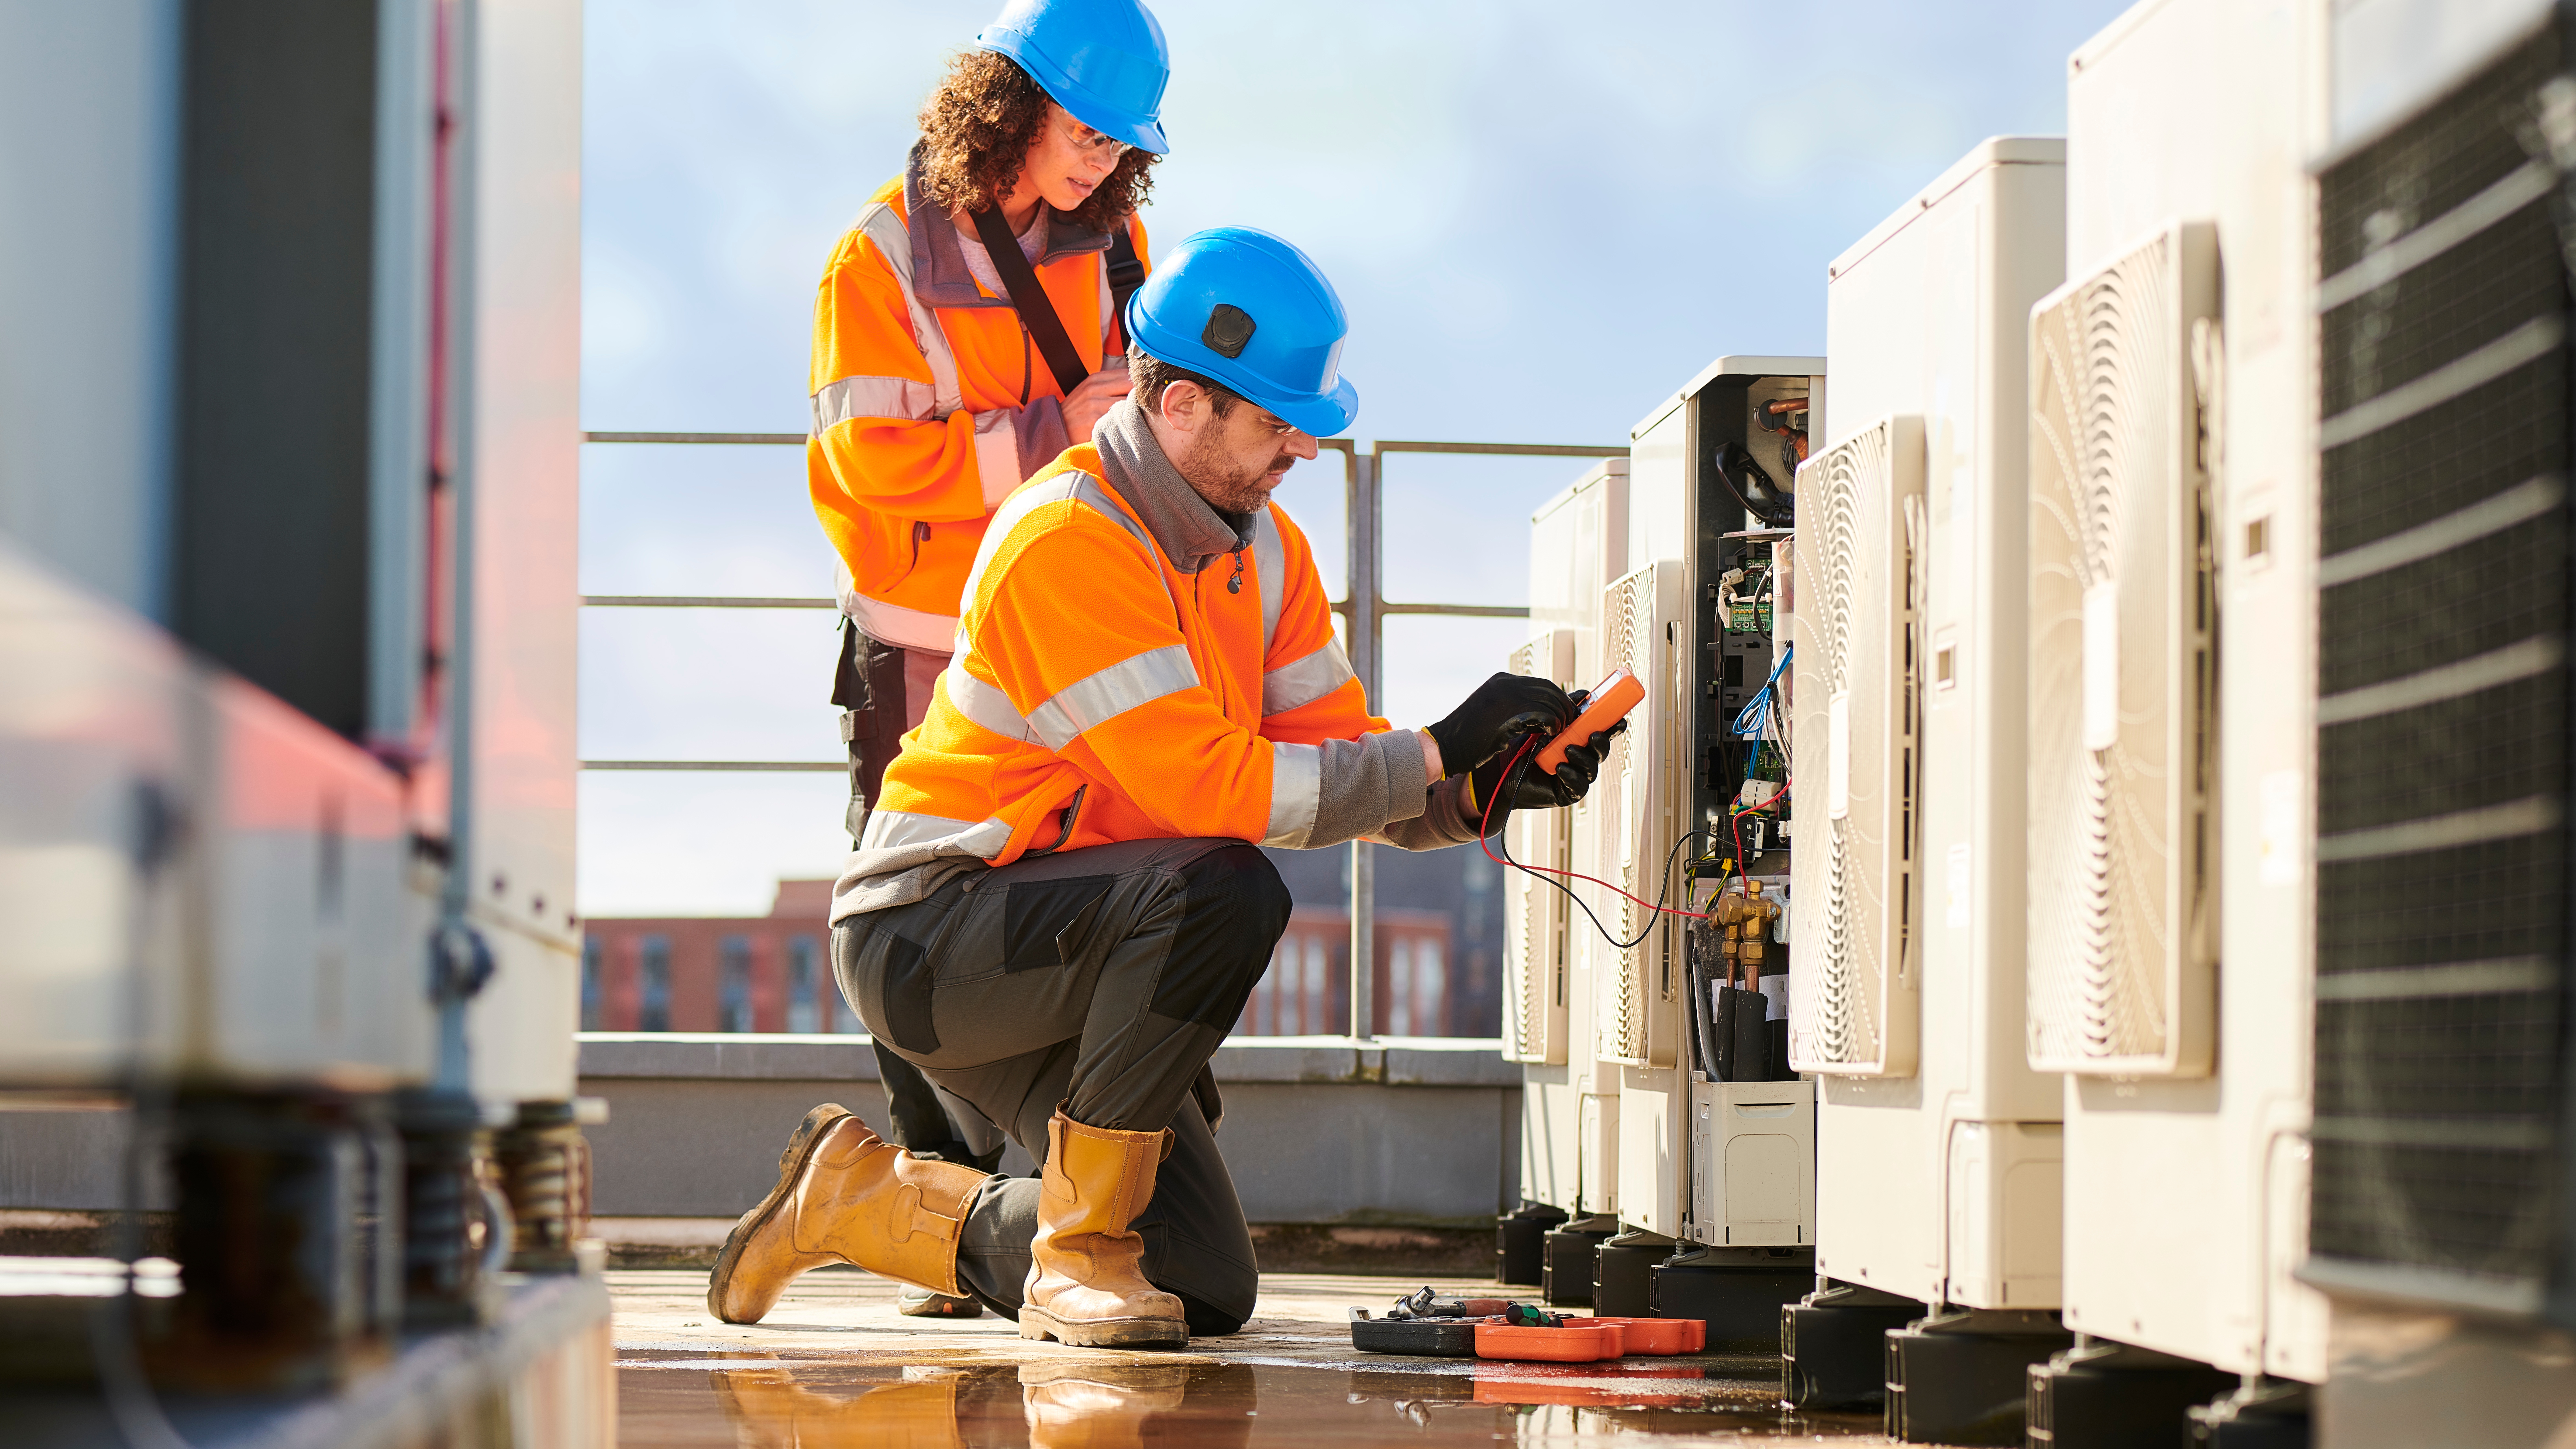 Aircon engineers on a roof of a building wearing protective gear